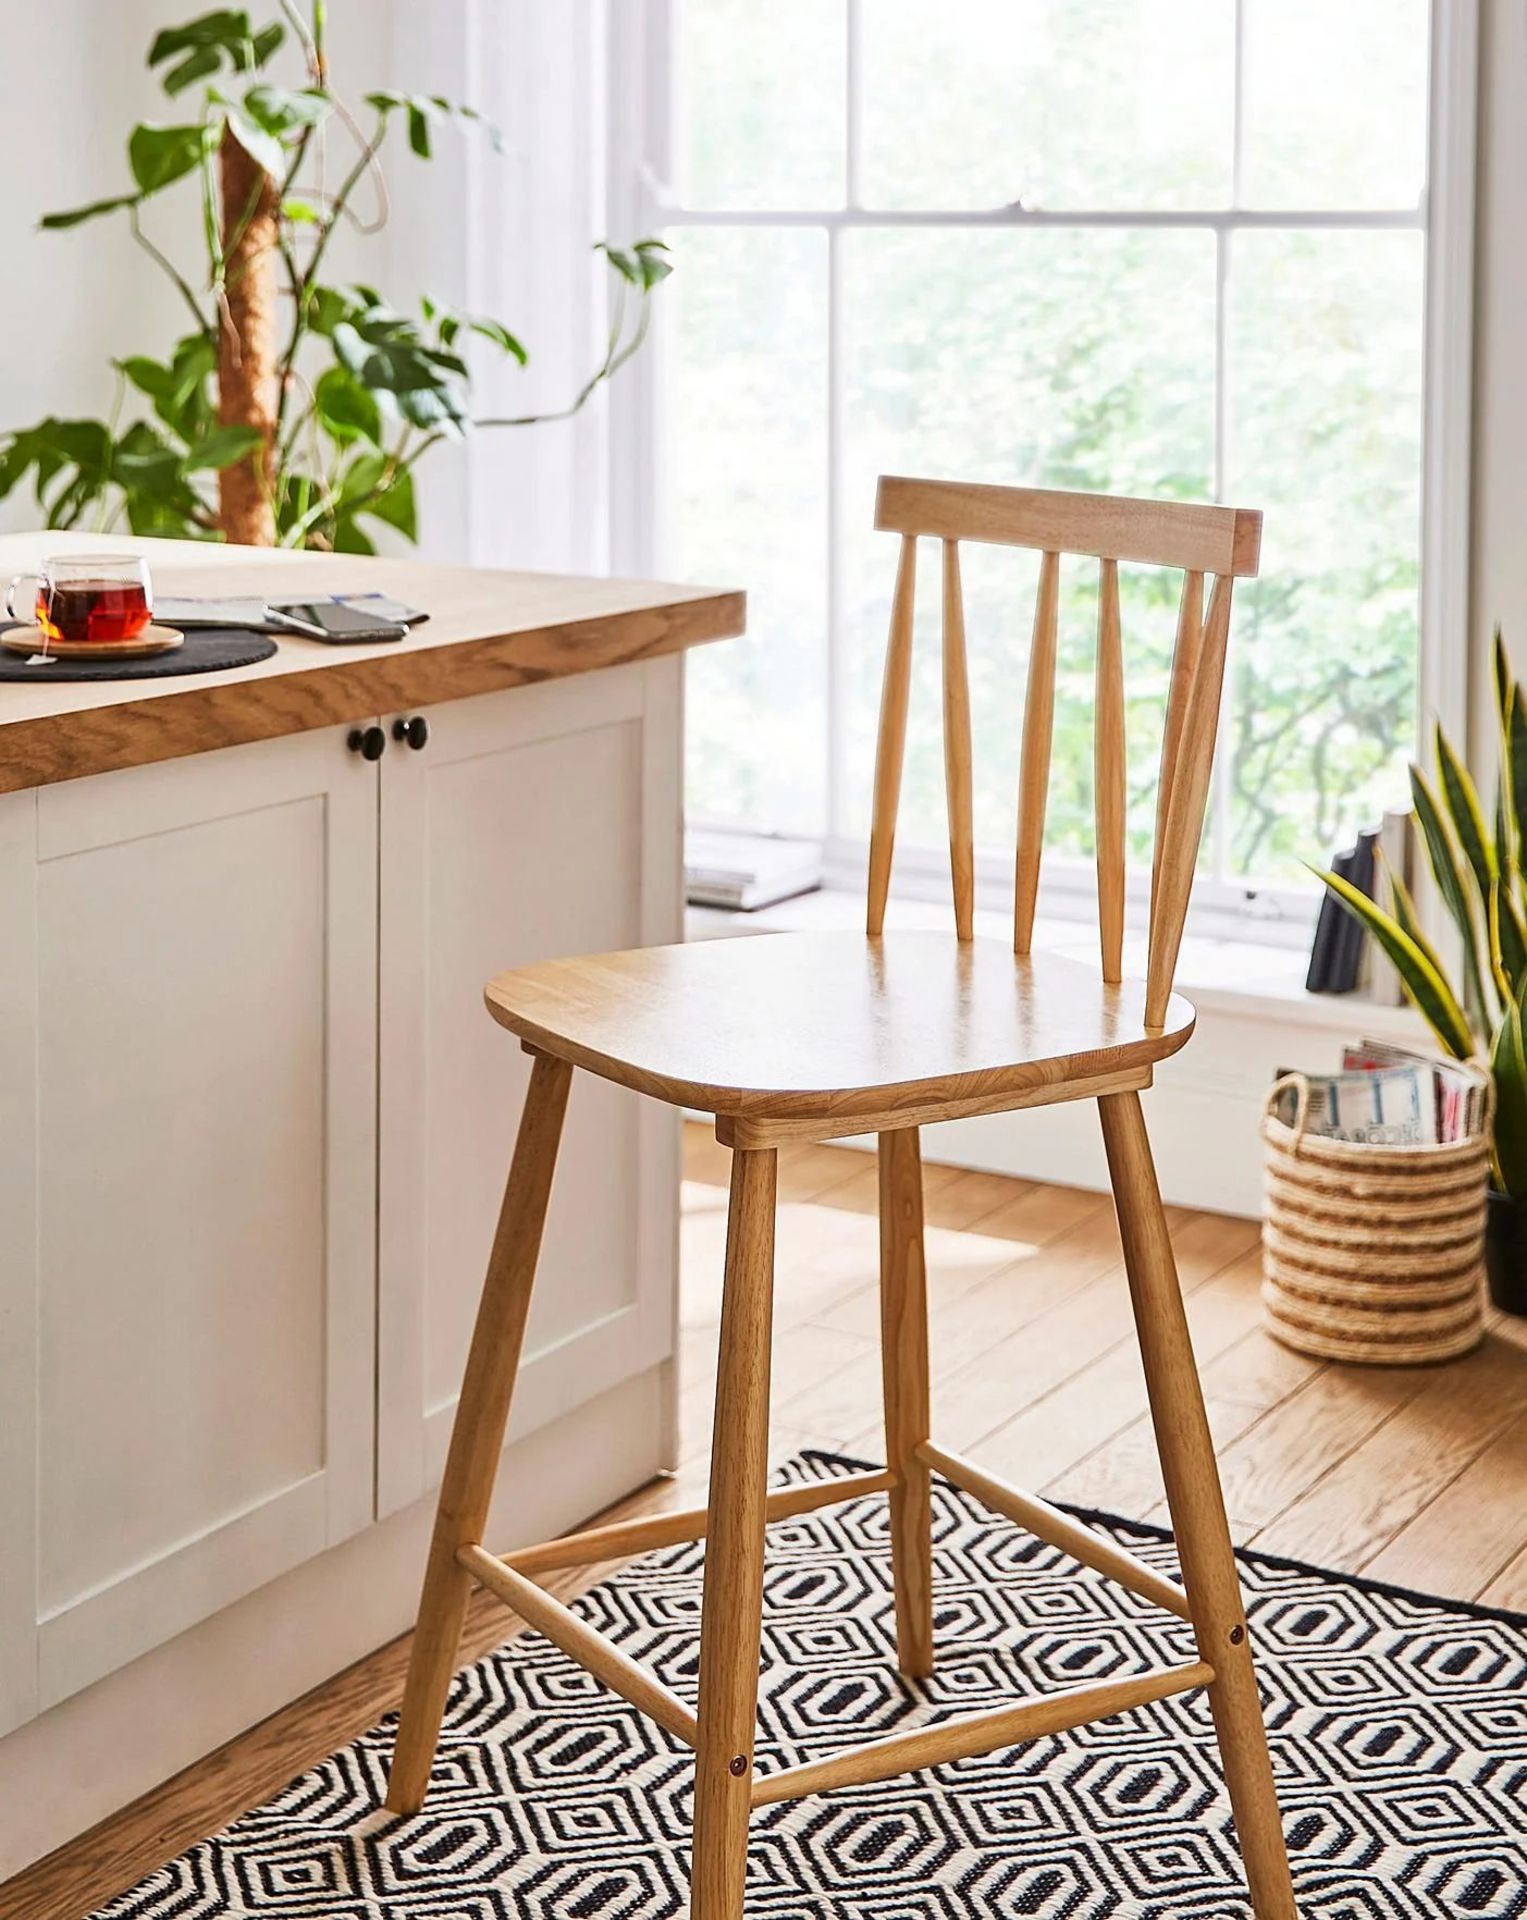 2 X BRAND NEW ERIKA SPINDLE BAR STOOLS RRP £169 EACH, Part of the Julipa Brand. With its stylish,